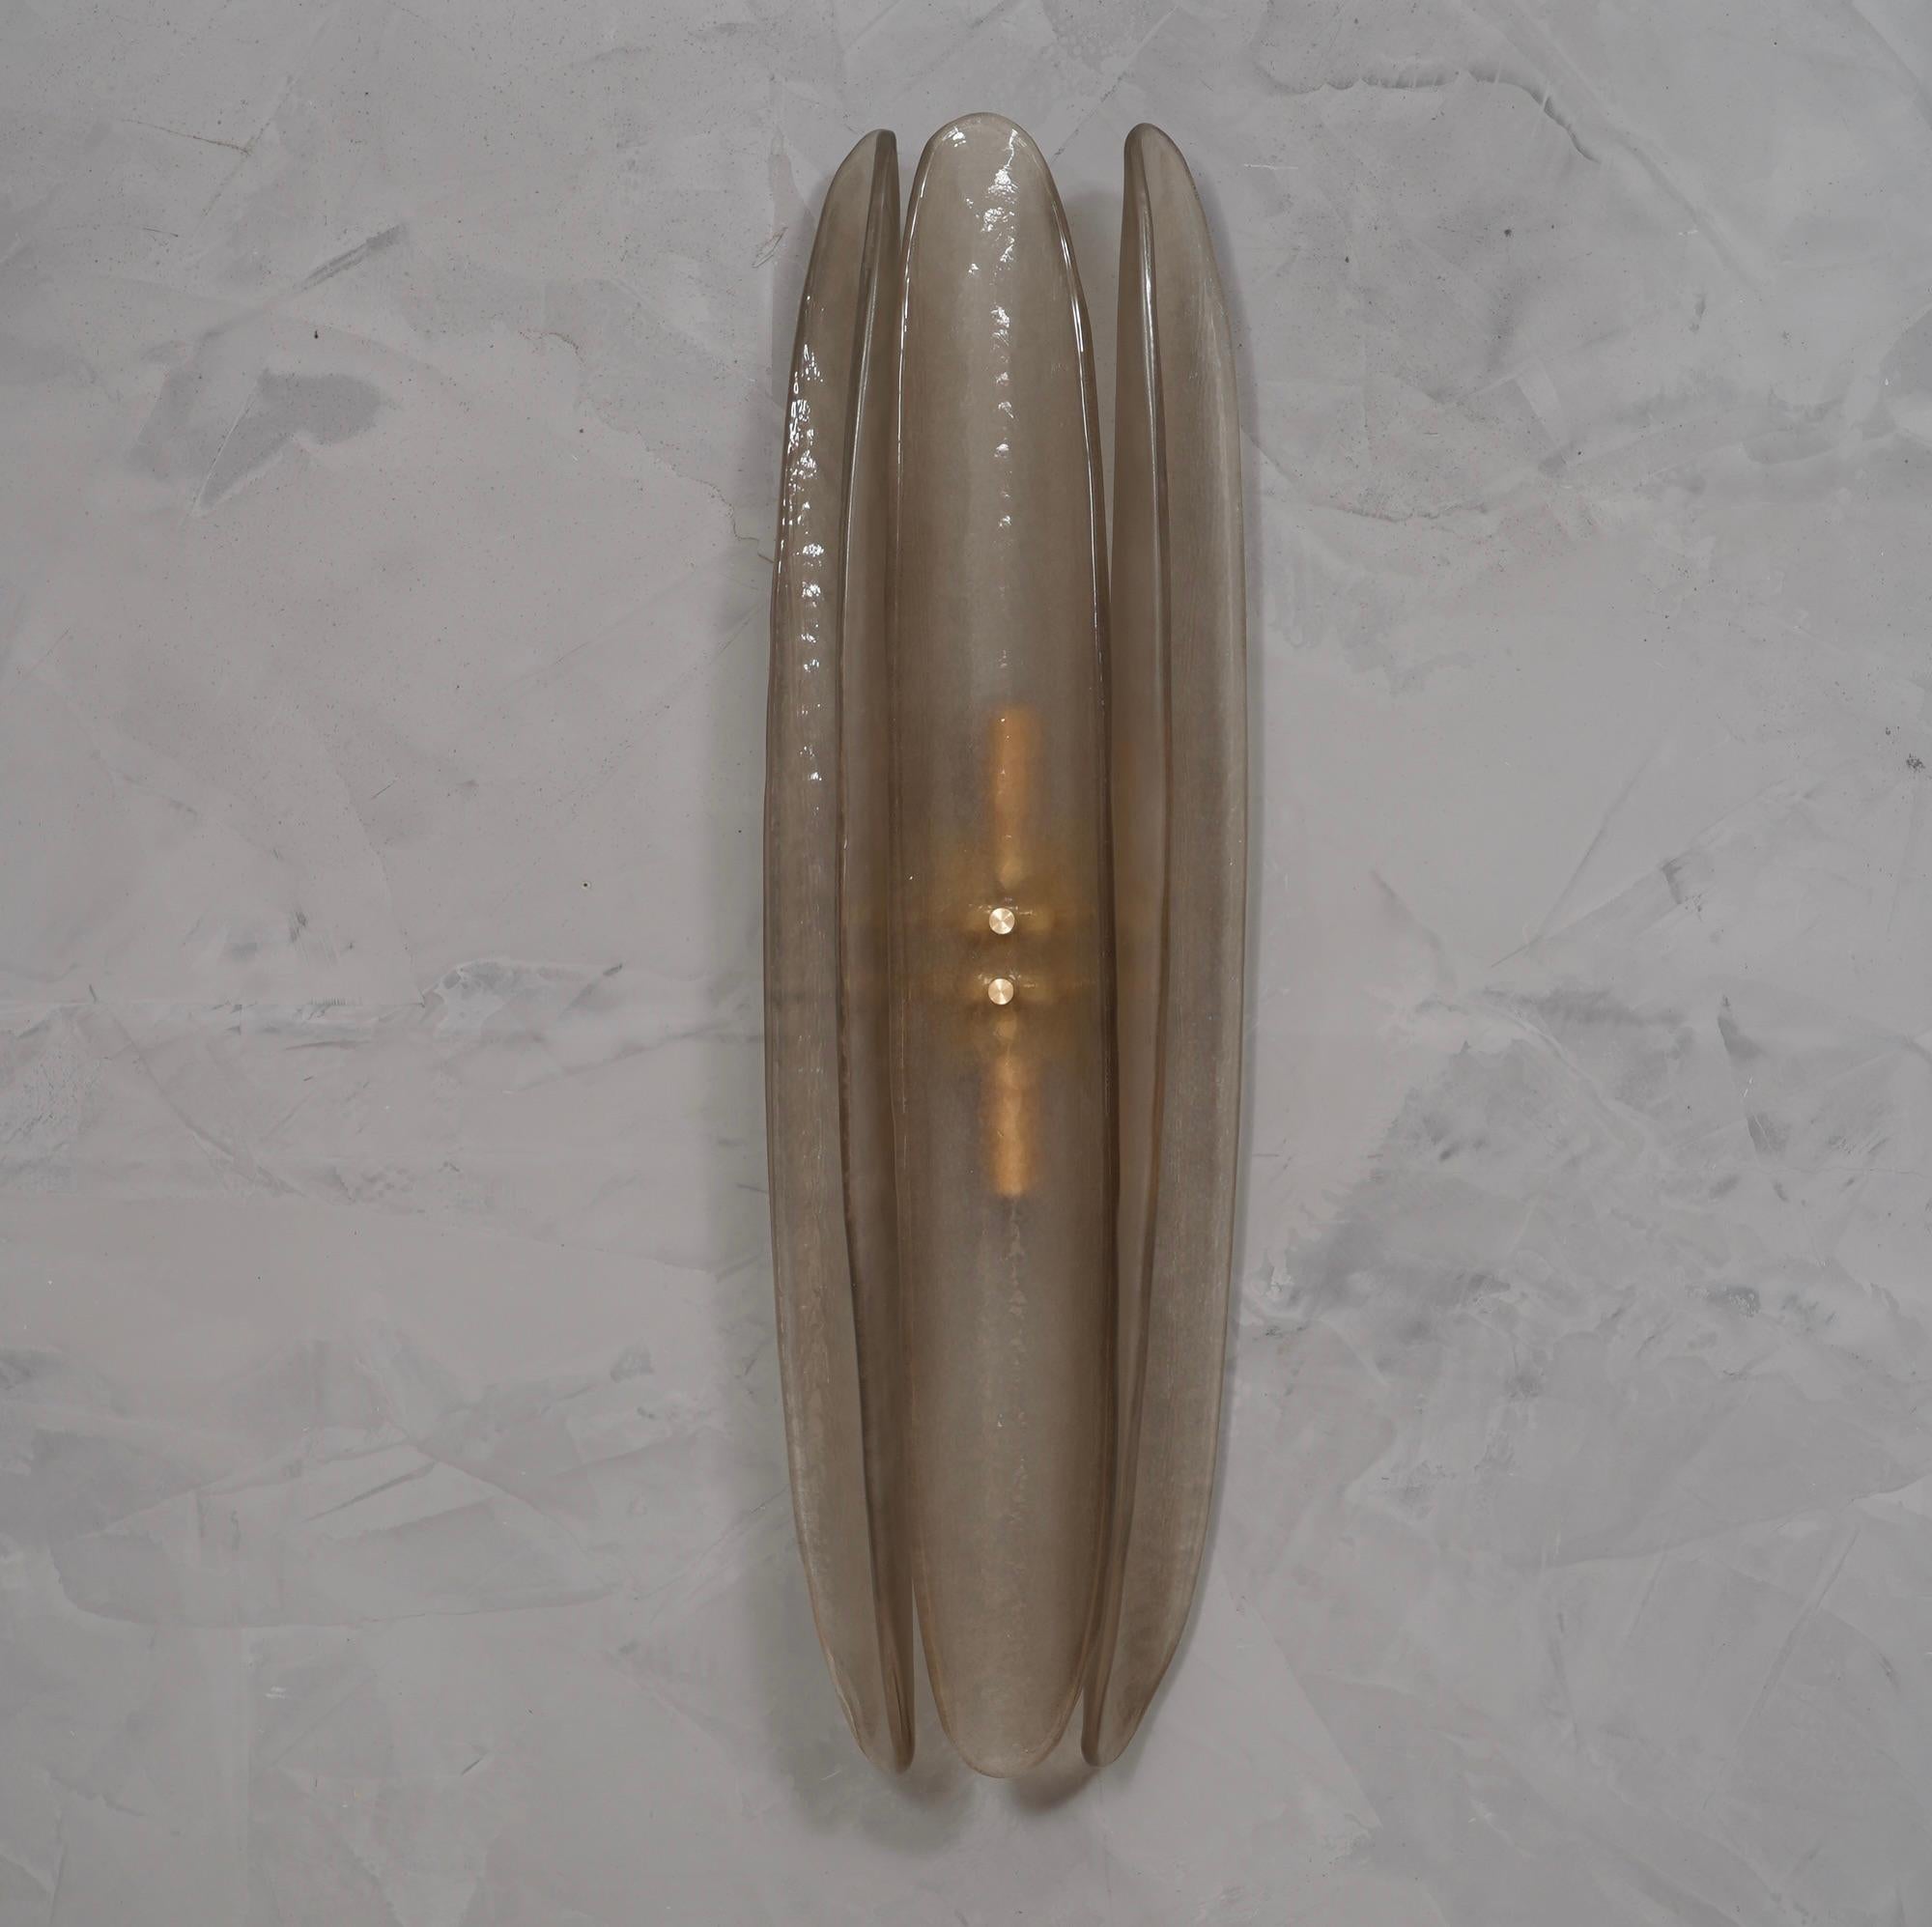 Murano Art Glass and Brass Smoked Color Mid-Century Wall Light and Sconces, 1980 For Sale 2